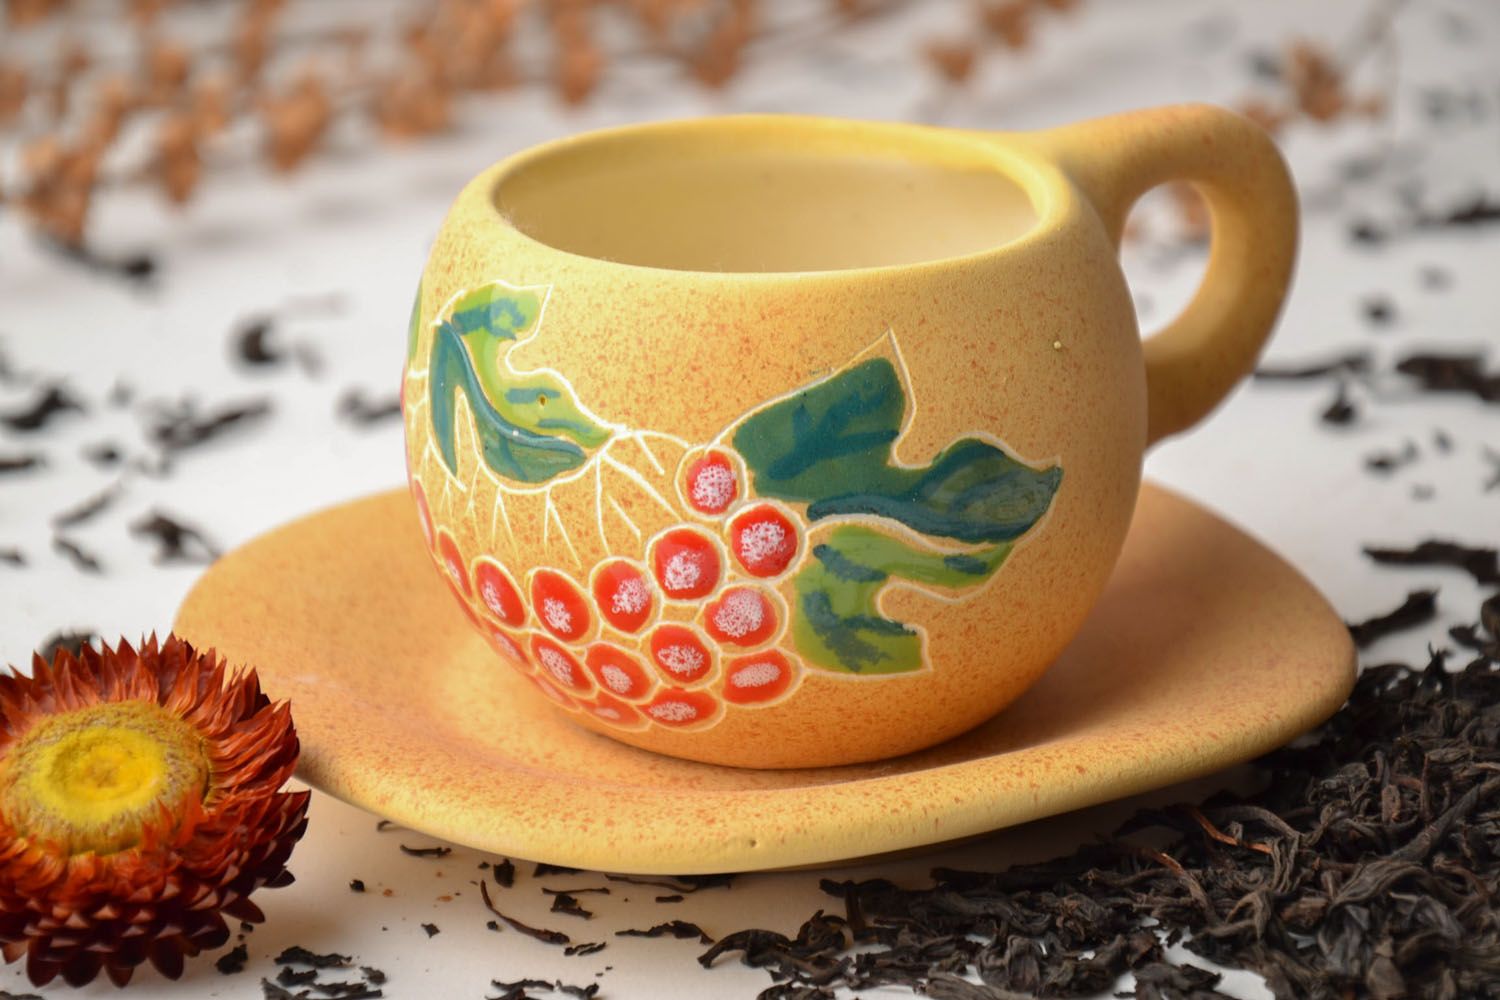 Art clay ceramic 5 oz cup with handle, saucer, and floral pattern photo 1